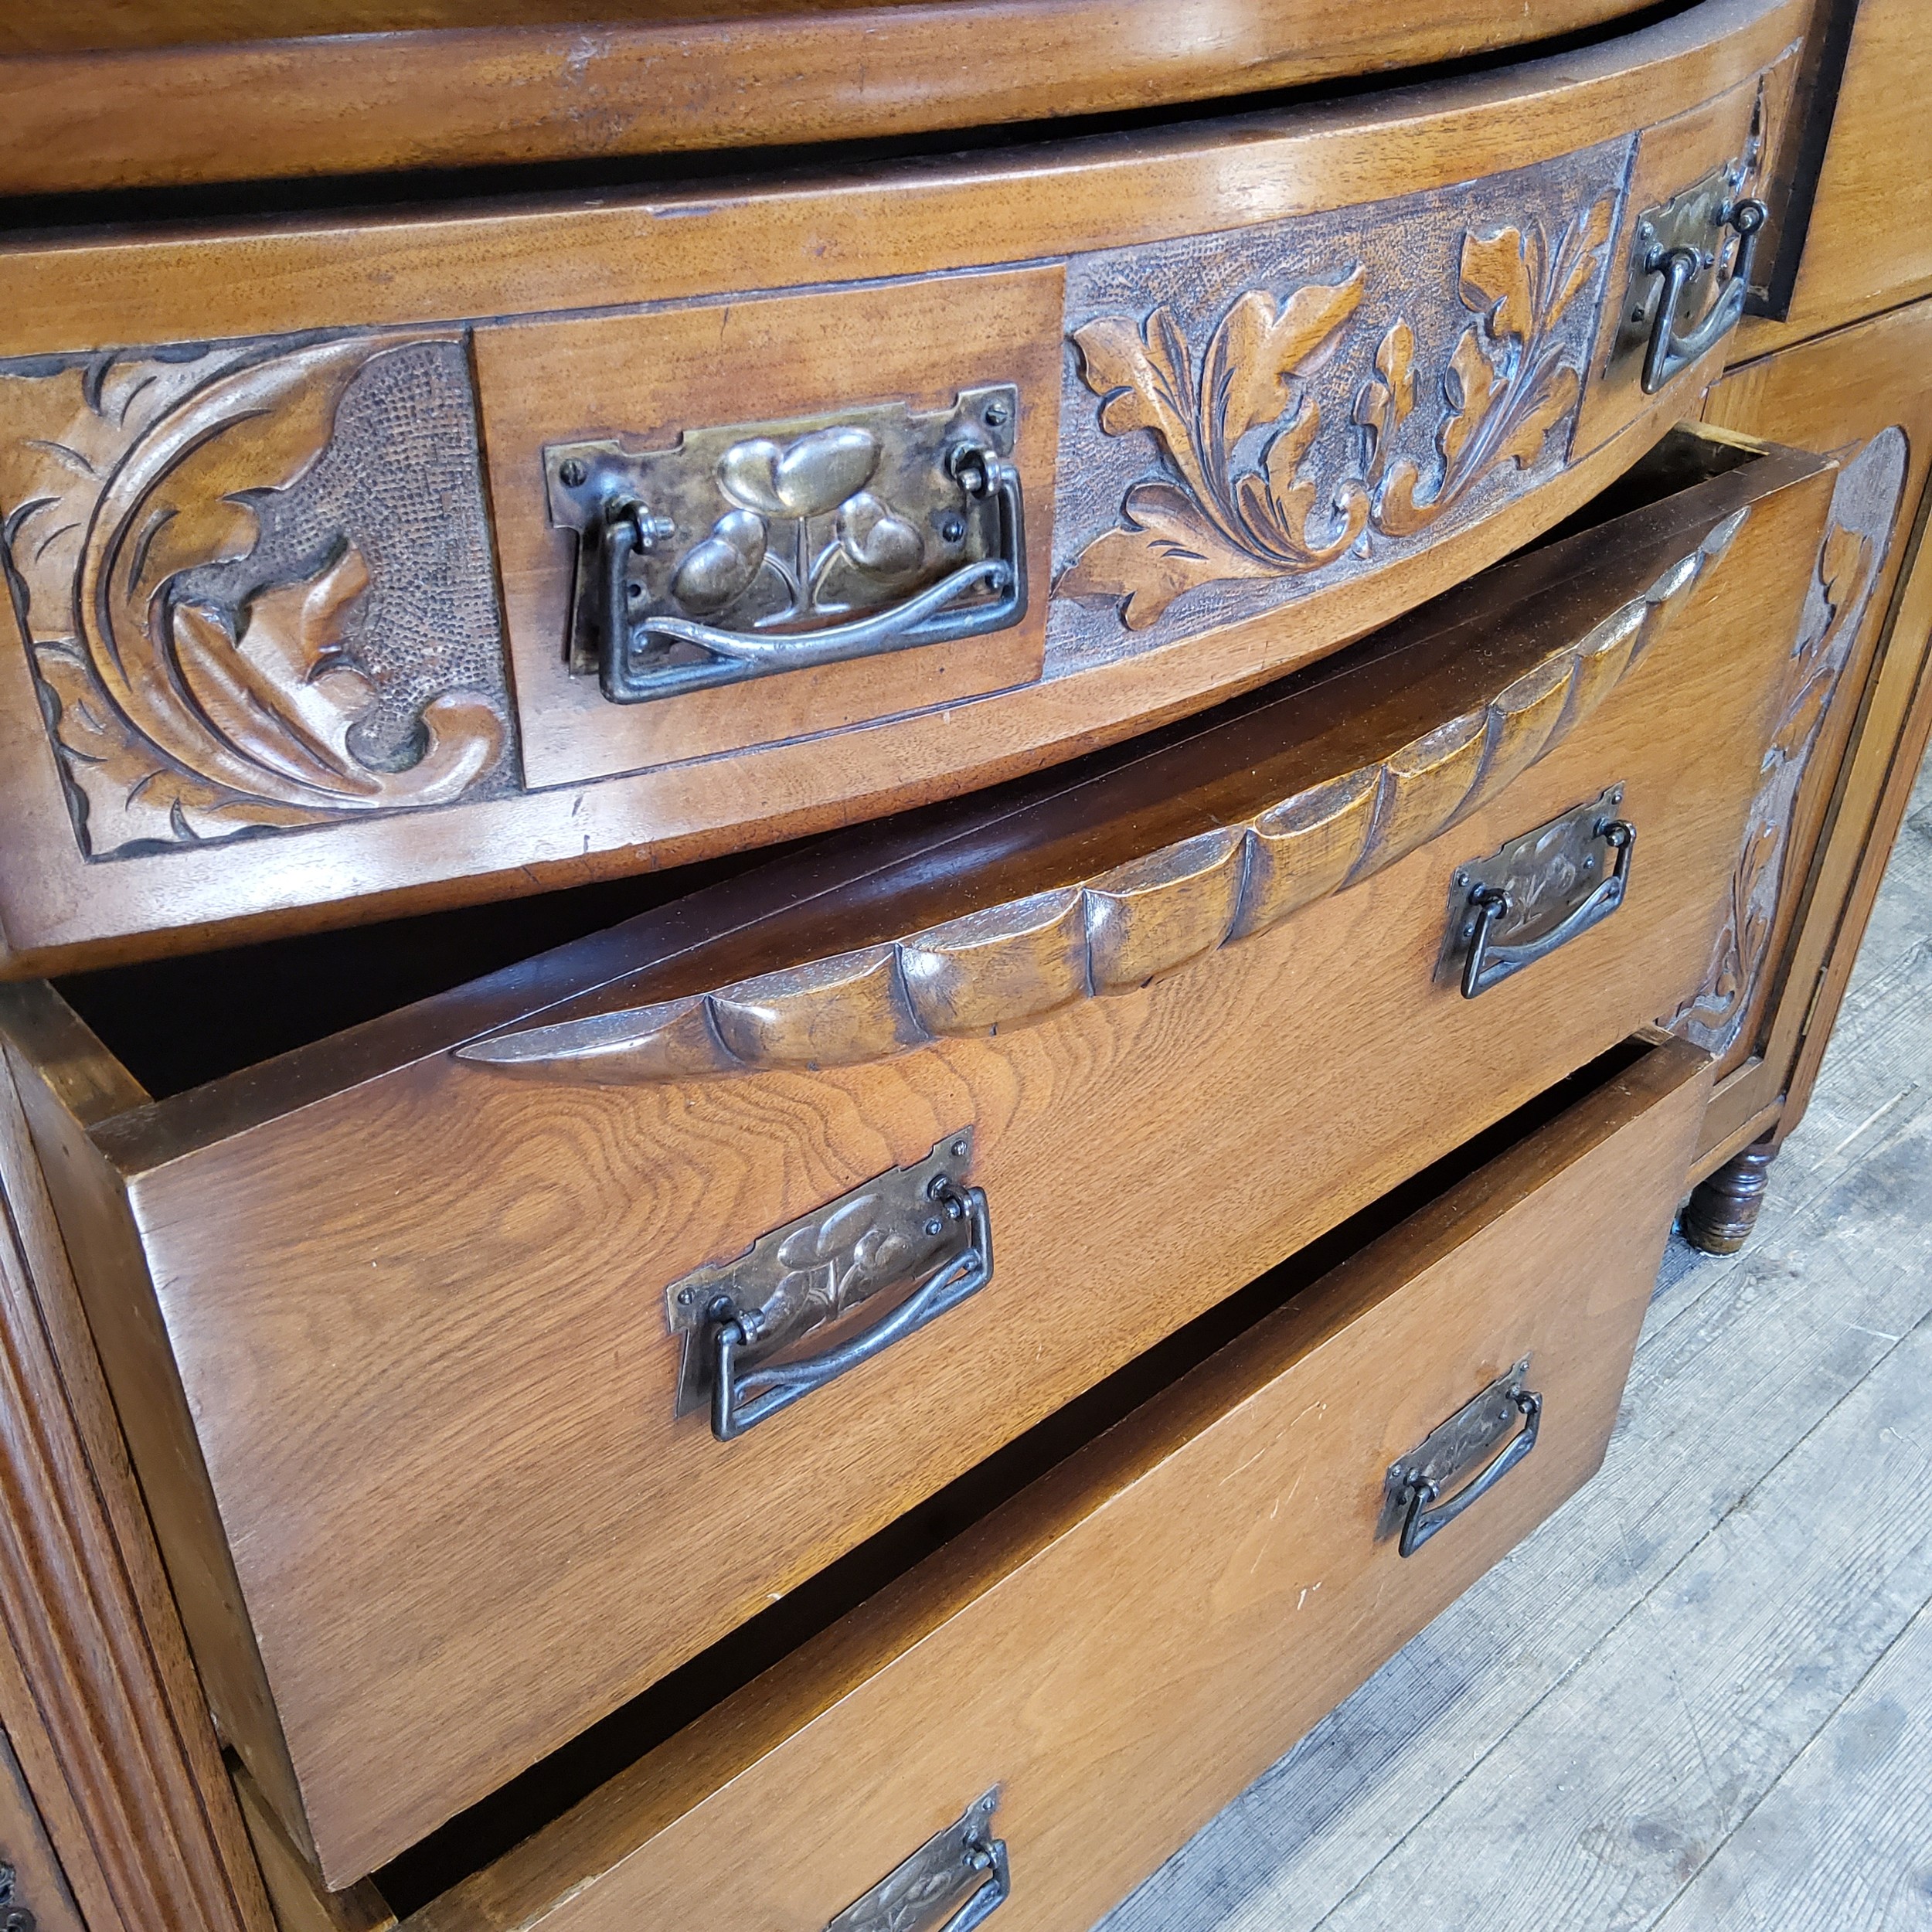 An early 20th century oak bow fronted breakfront sideboard with oversized Art Nouveau escutcheons - Image 3 of 4